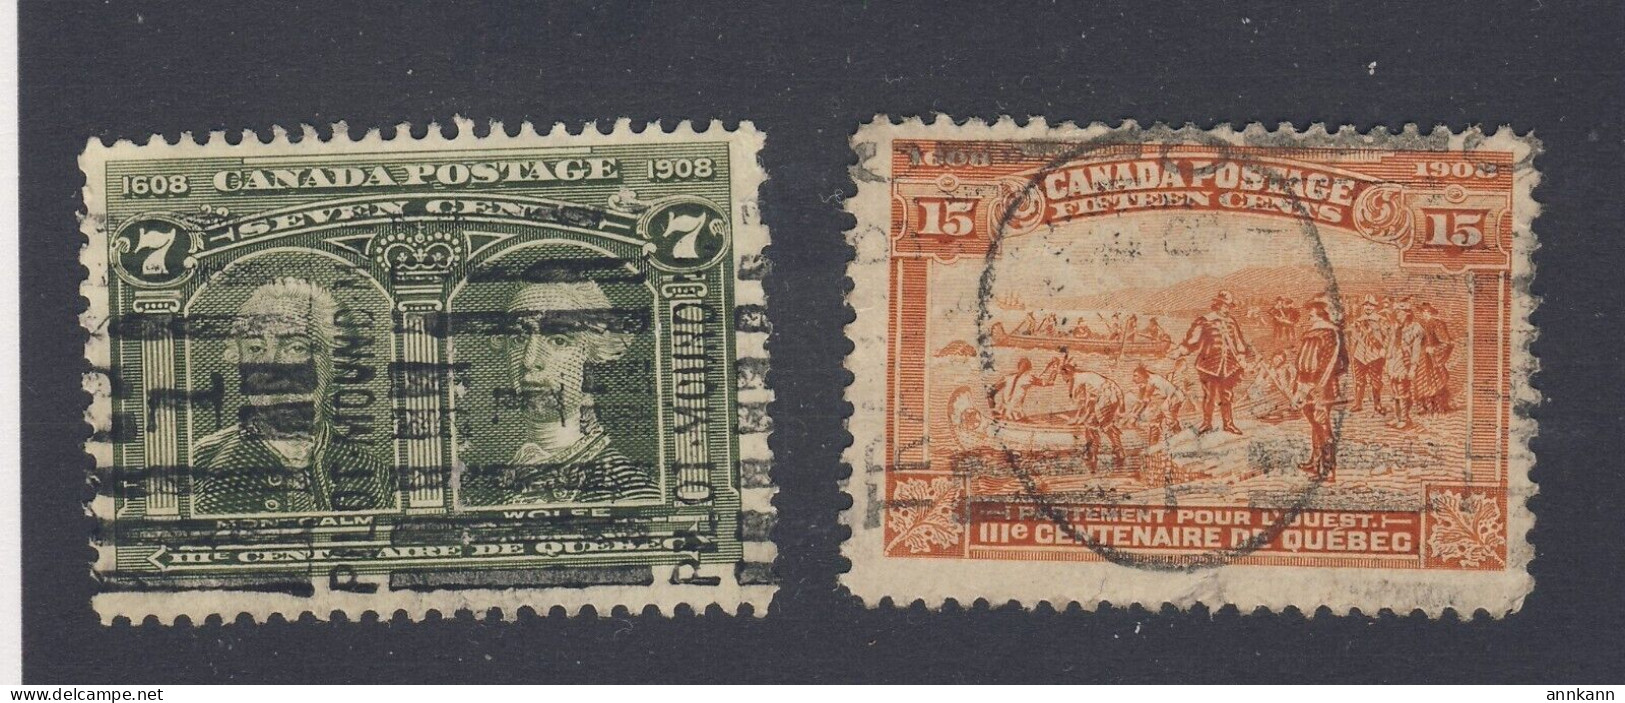 2x Canada 1908 Quebec Used Stamps #100-7c #102-15c SON Guide Value = $150.00 - Gebraucht